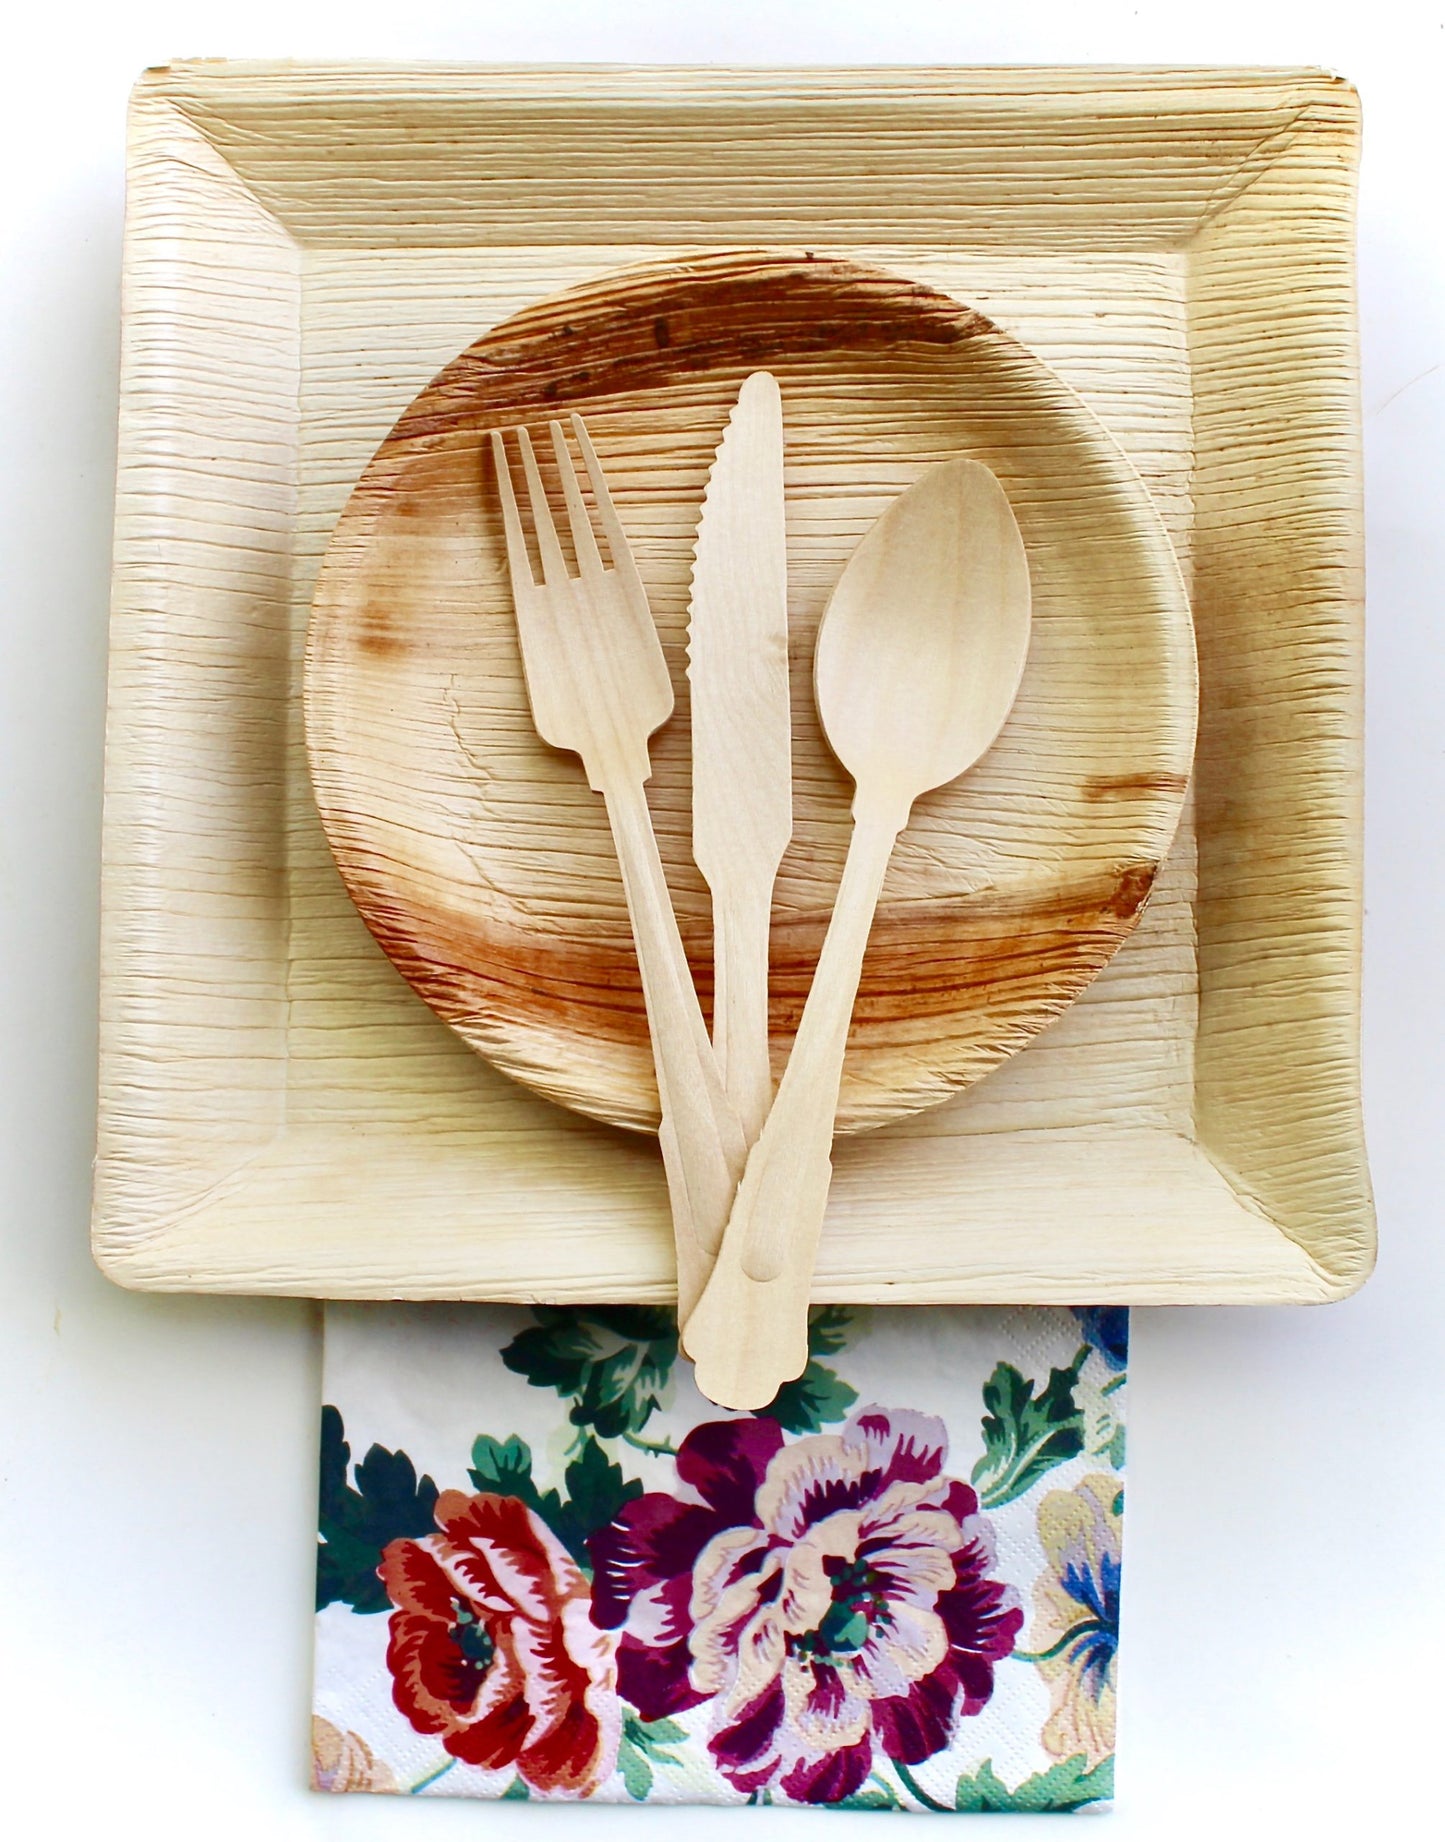 palm leaf plates 10 pice 10 "Round  and  10 Pic 6" round  30  pic cutler - 20 pic napkin   disposable and biodegrable - compostable